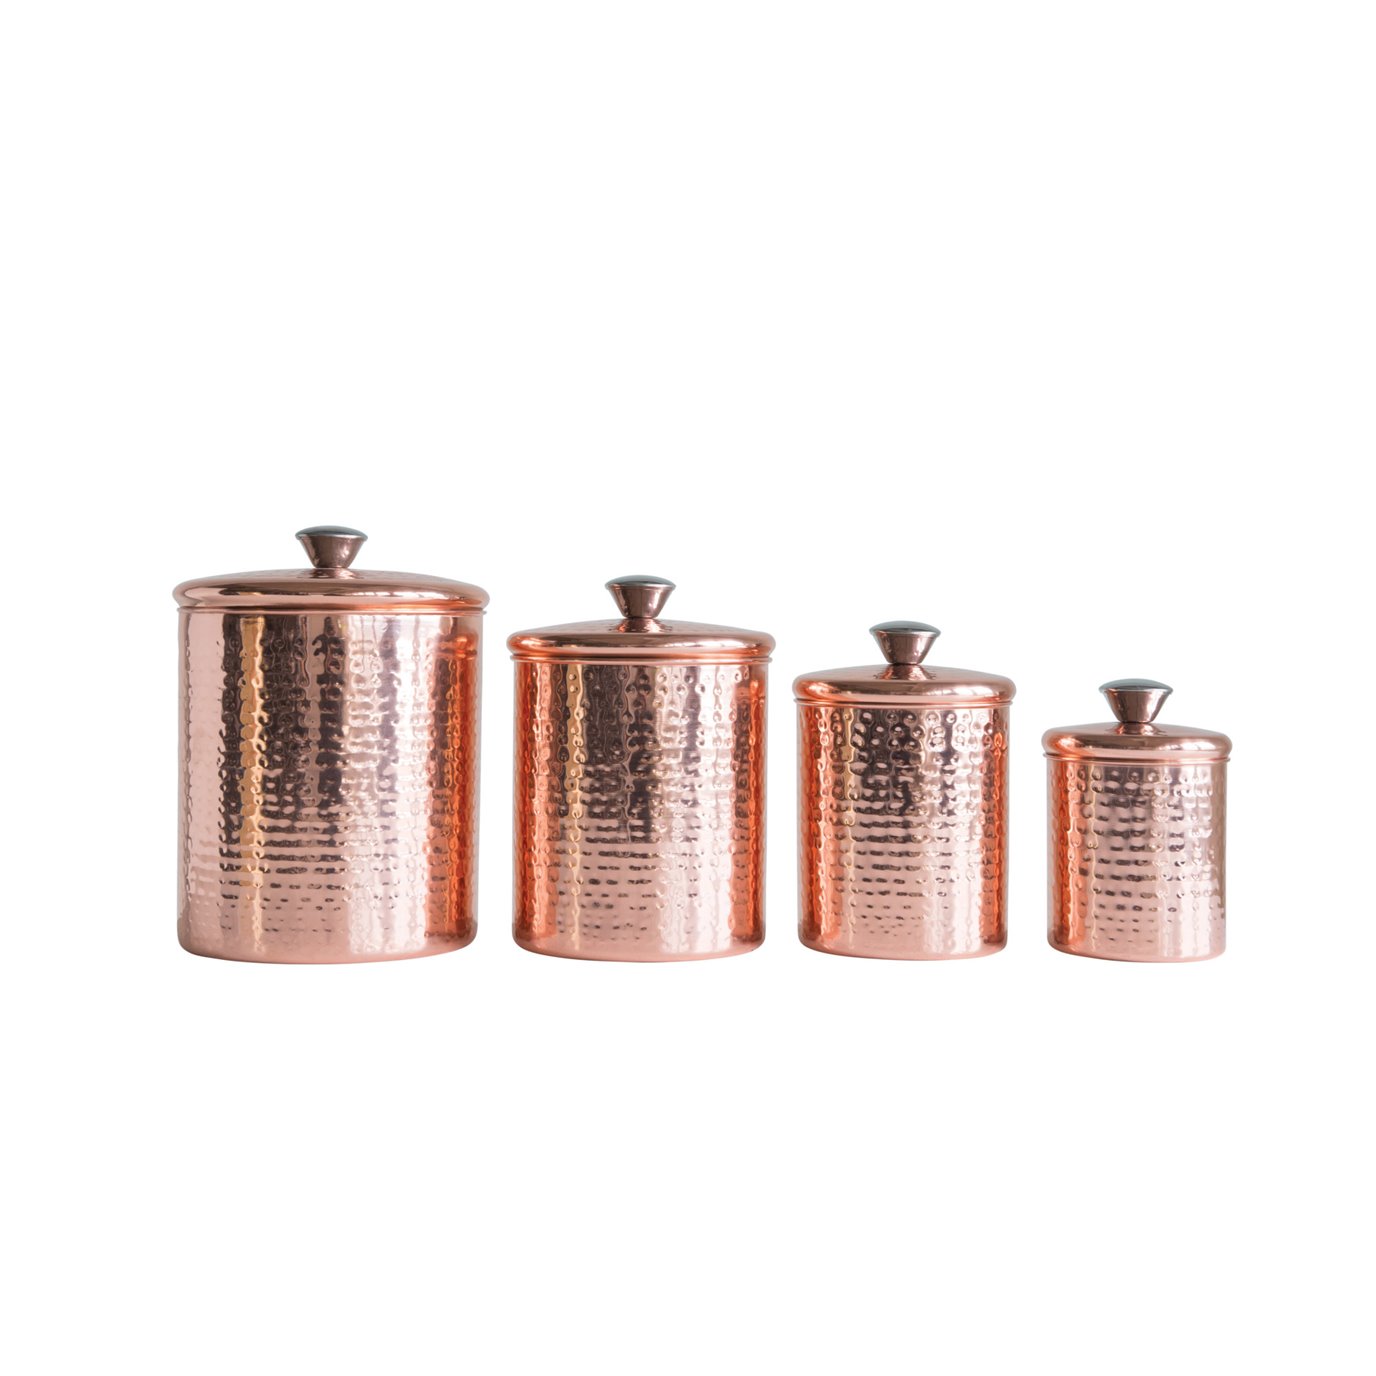 Hammered Stainless Steel Canisters with Lids in Copper Finish (Set of 4 Sizes)